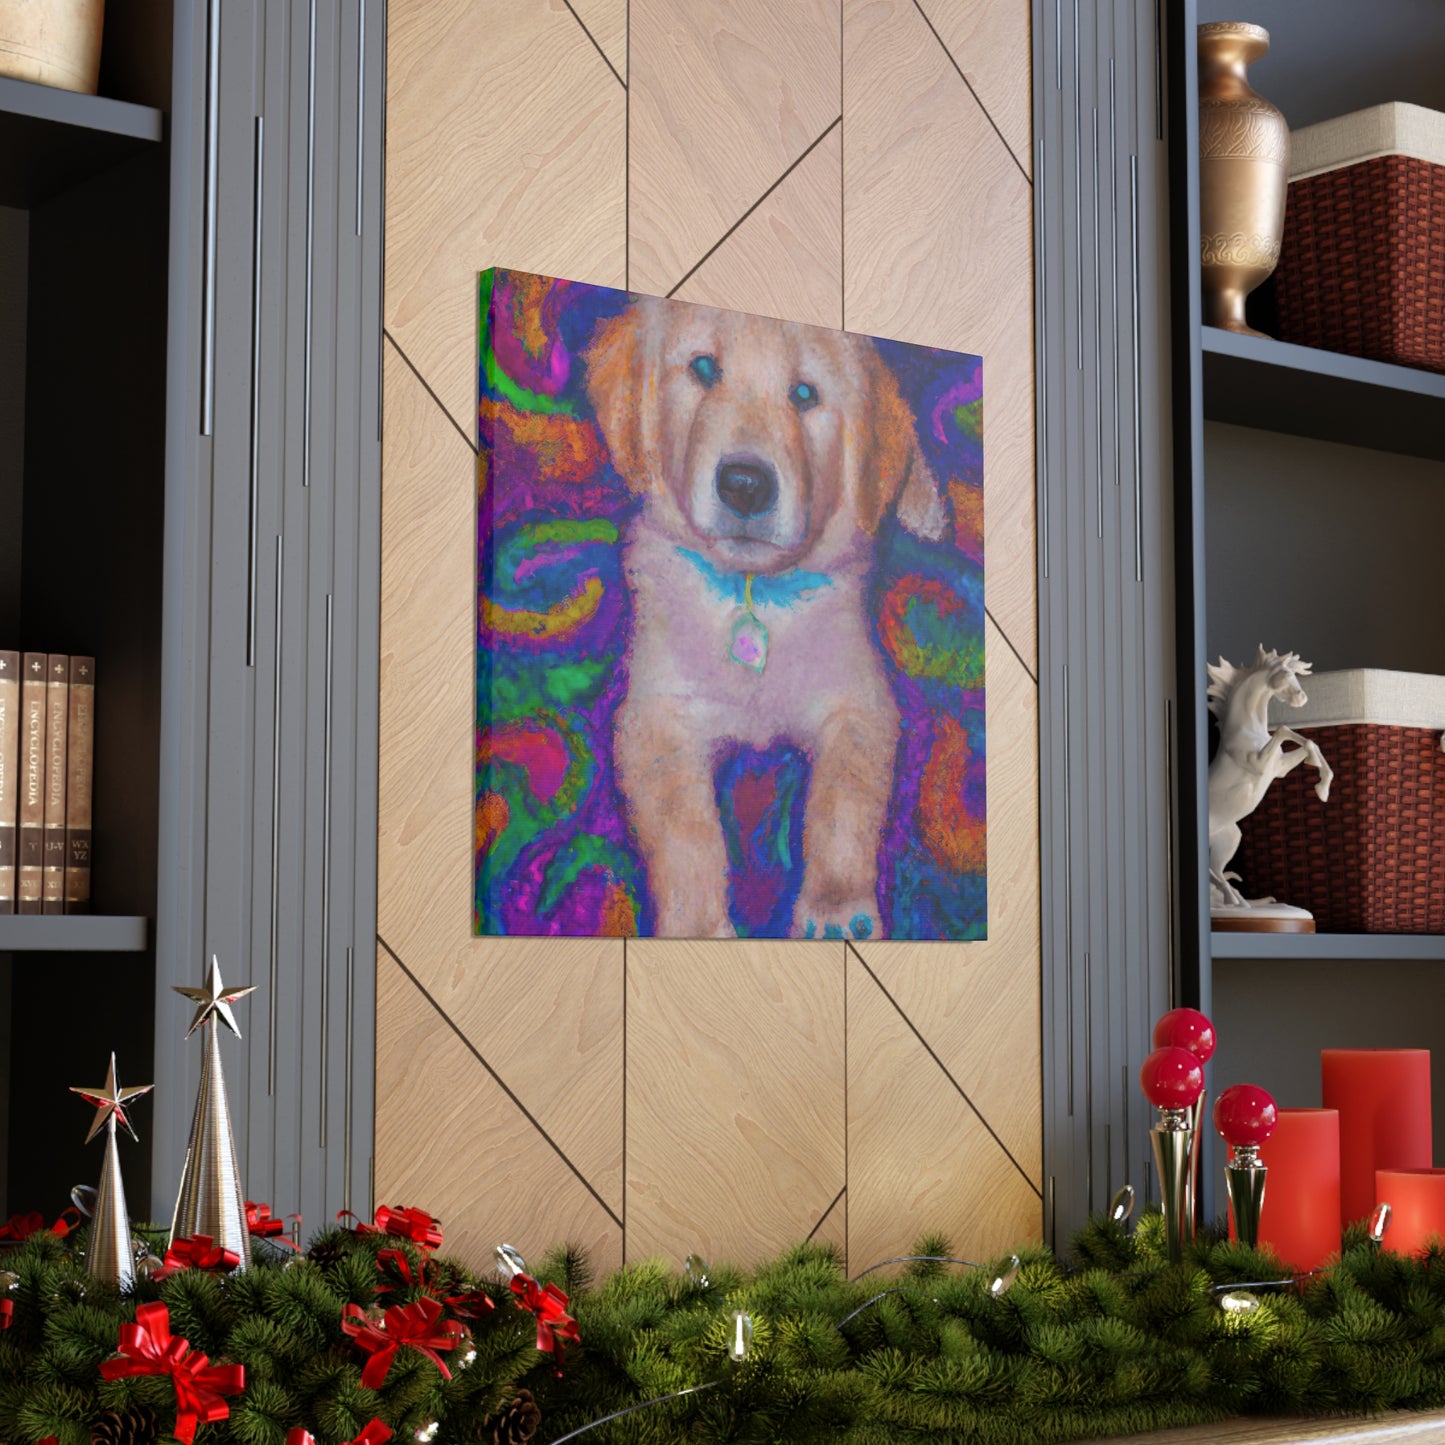 Lord Fausto Hopecliff - Golden Retriever Puppy - Canvas